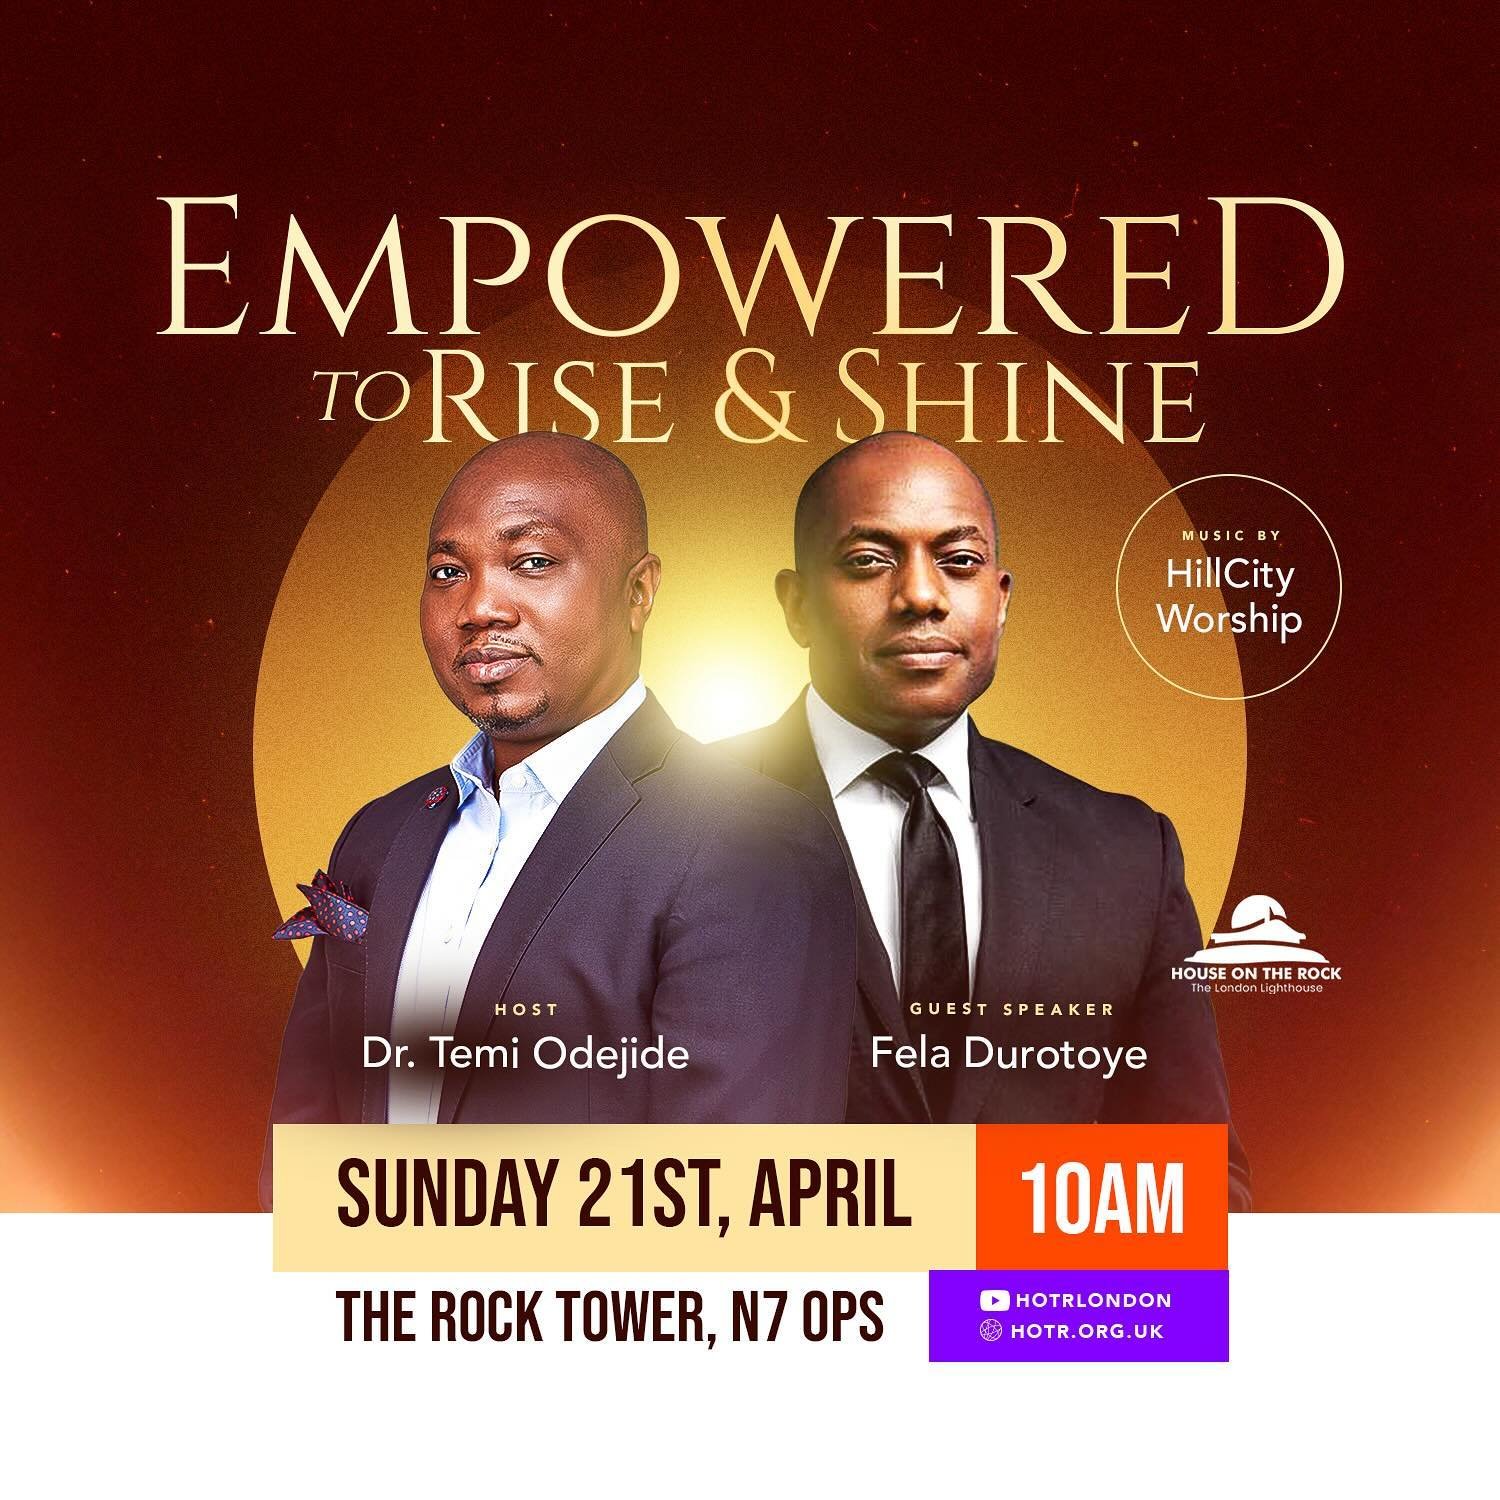 &ldquo;Join us this Sunday for a truly inspiring experience at our special service, &lsquo;Empowered to Arise and Shine.&rsquo; 

@drtemiodejide welcome&rsquo;s the renowned leadership expert @feladurotoye, who will be joining us for an enriching ses